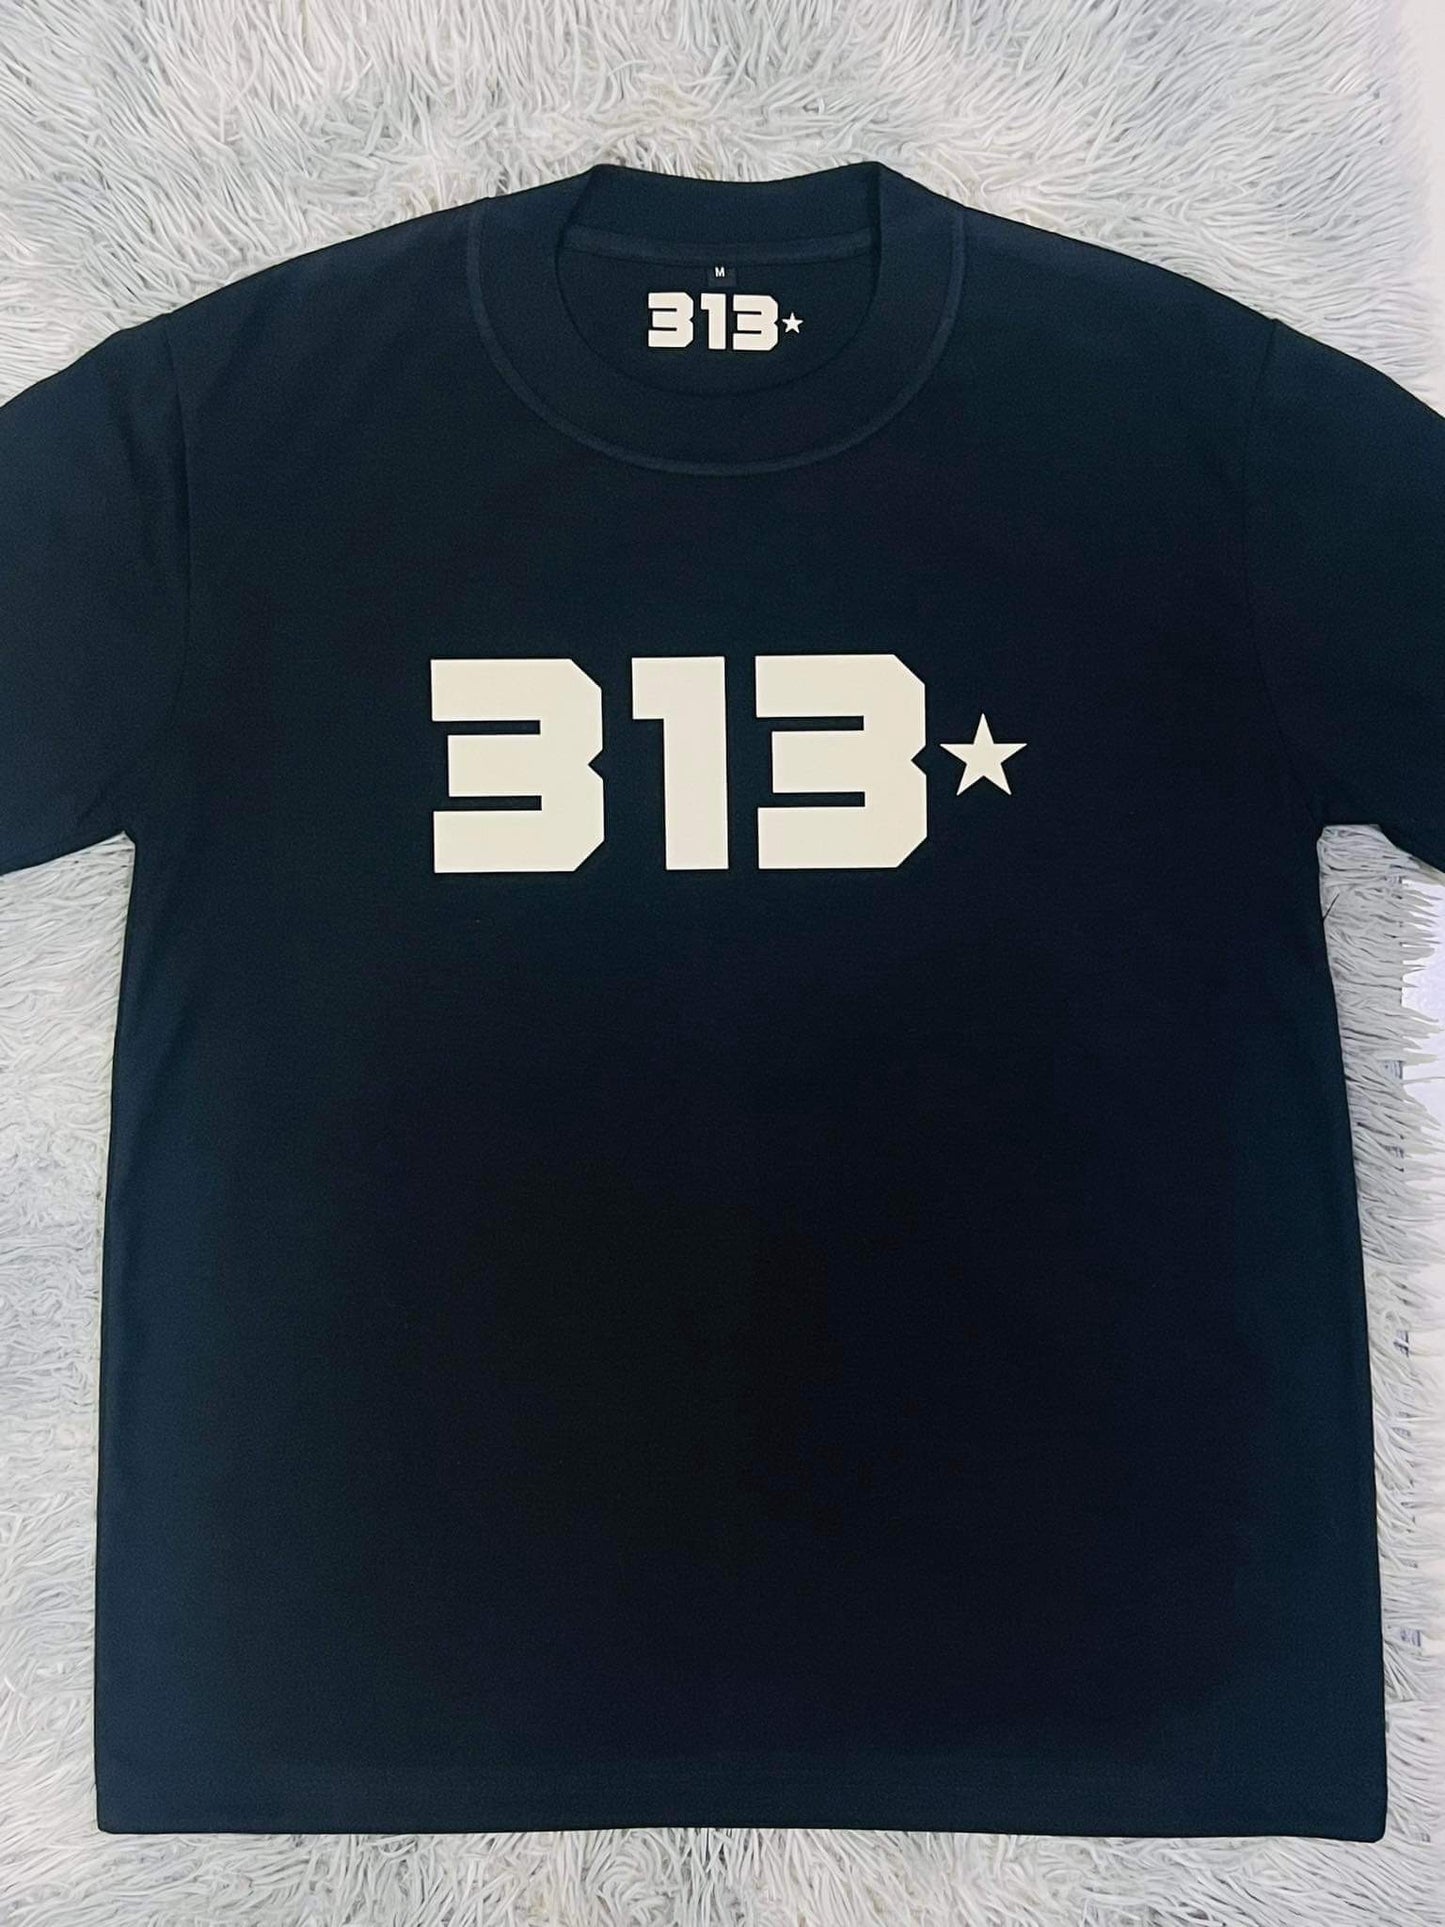 Limited Edition 313 Clothing (Black Series)